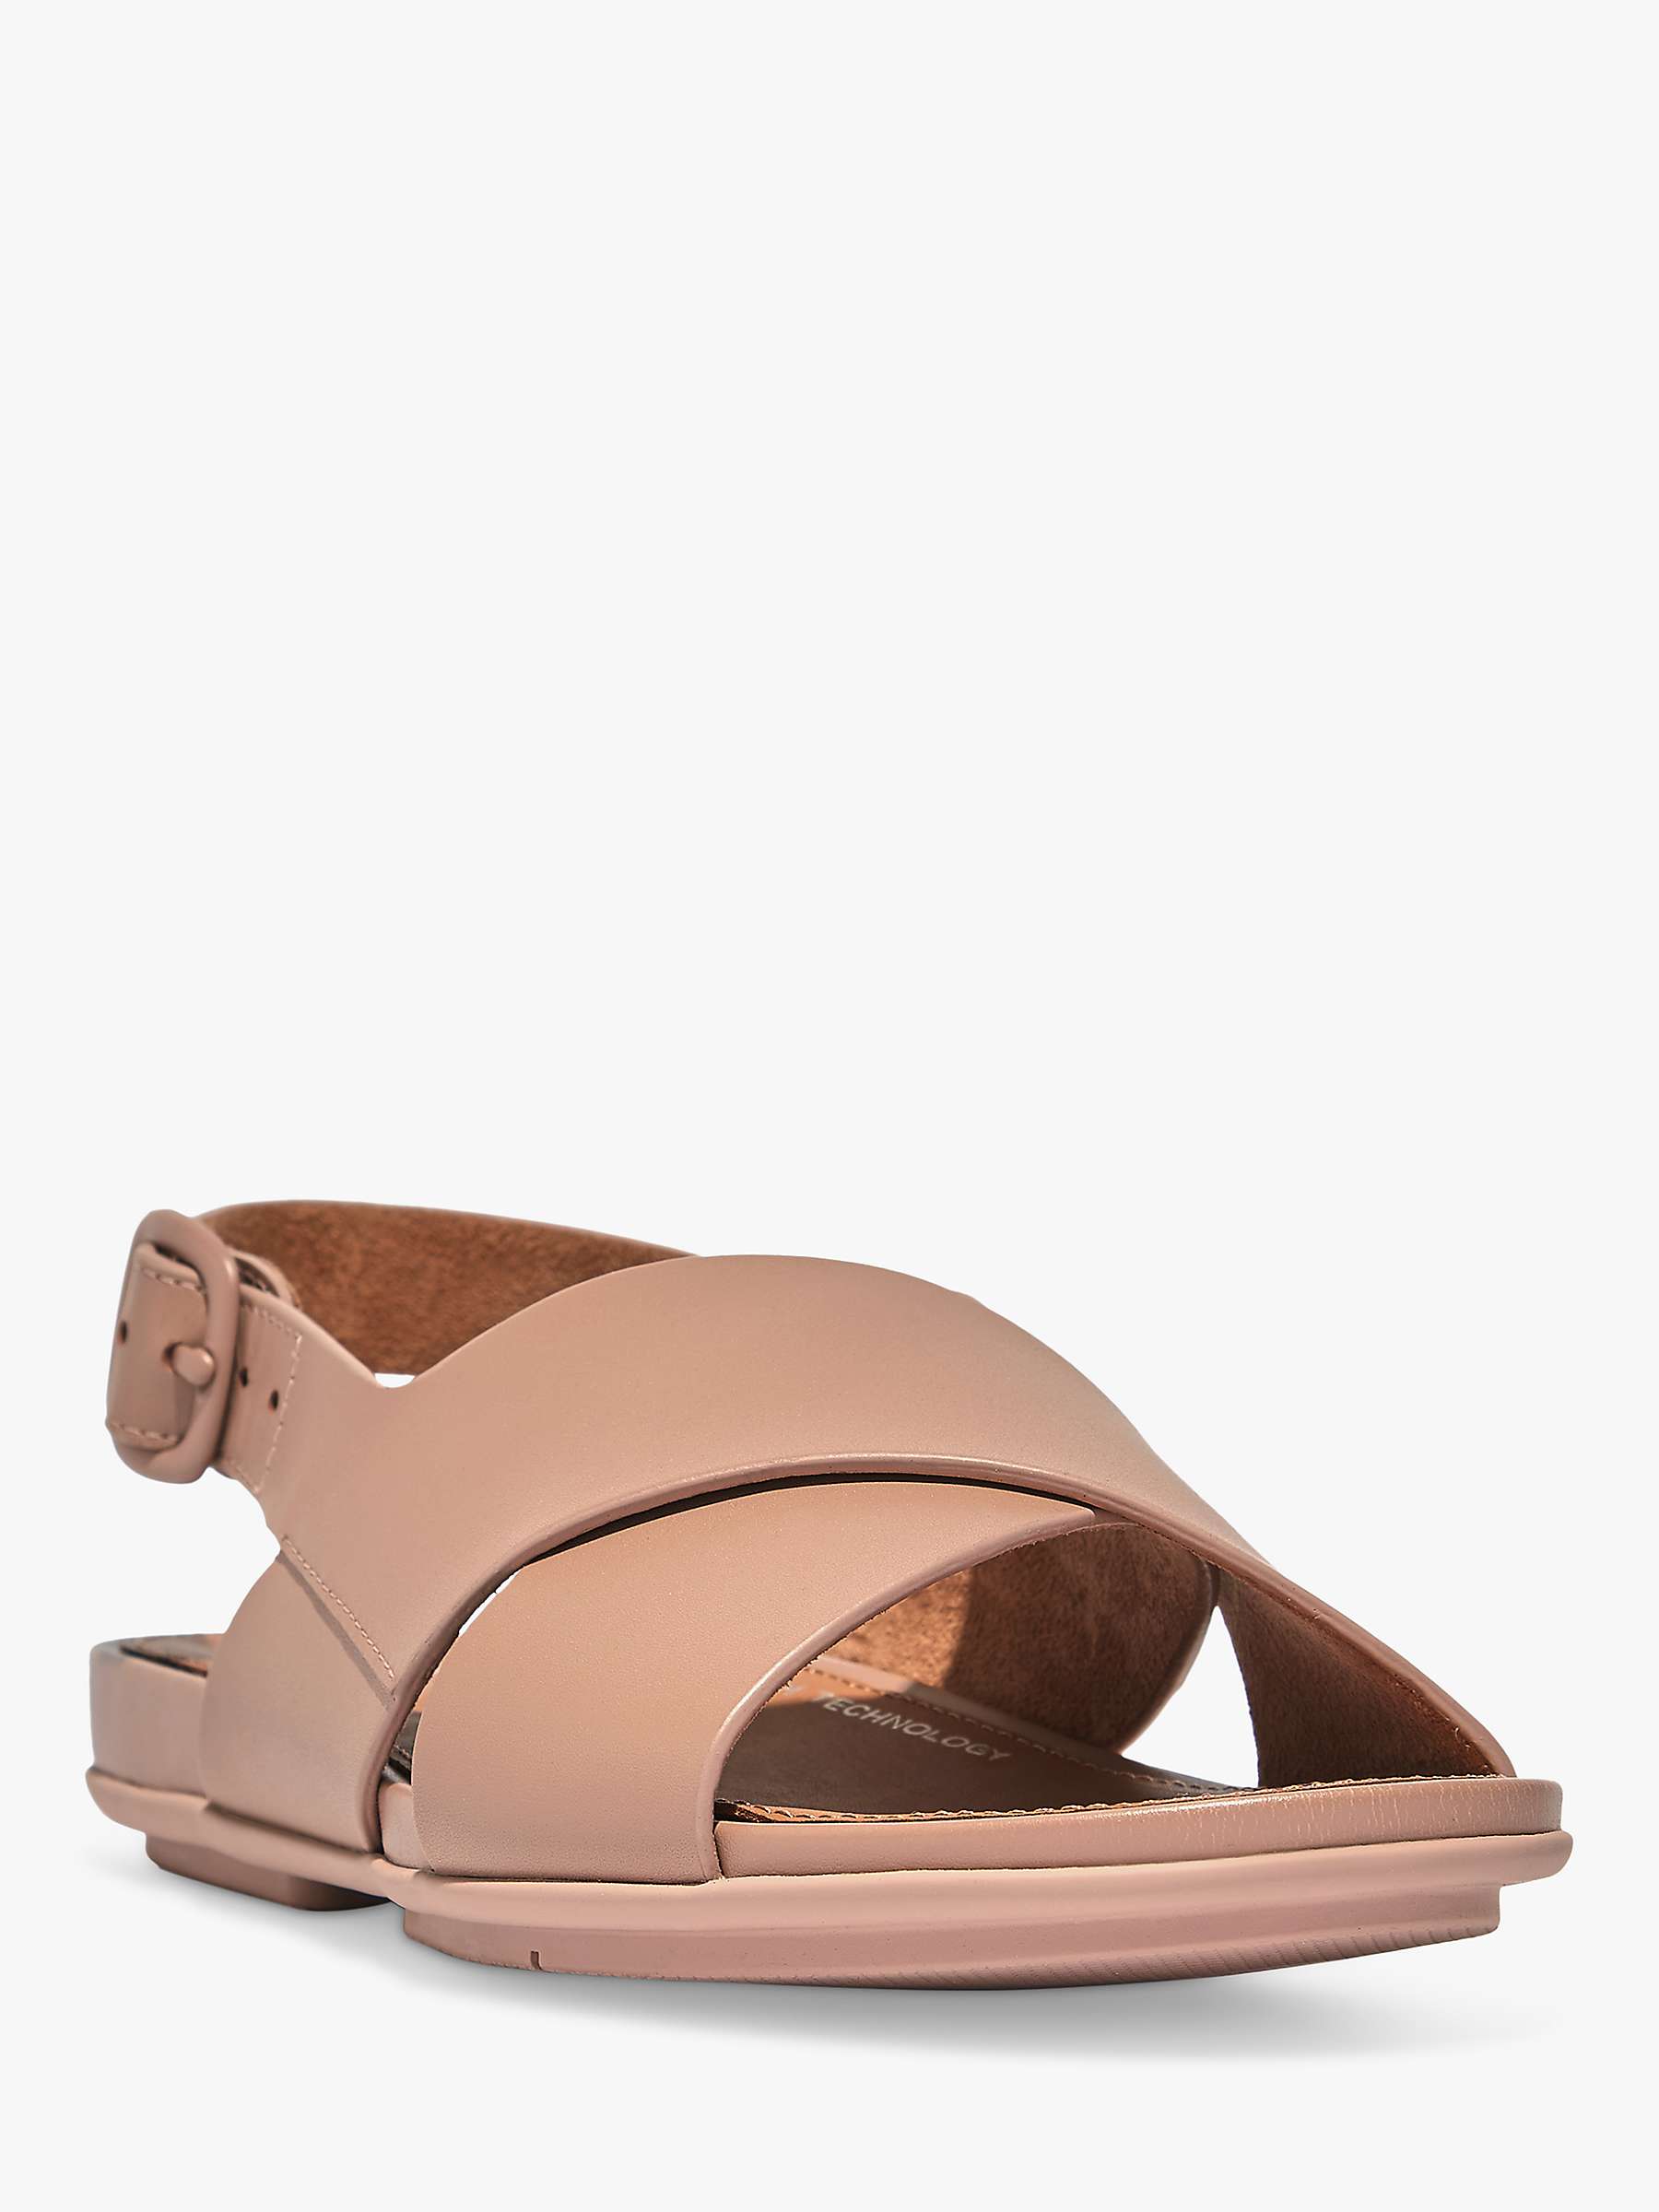 Buy FitFlop Gracie Leather Back Sandals Online at johnlewis.com